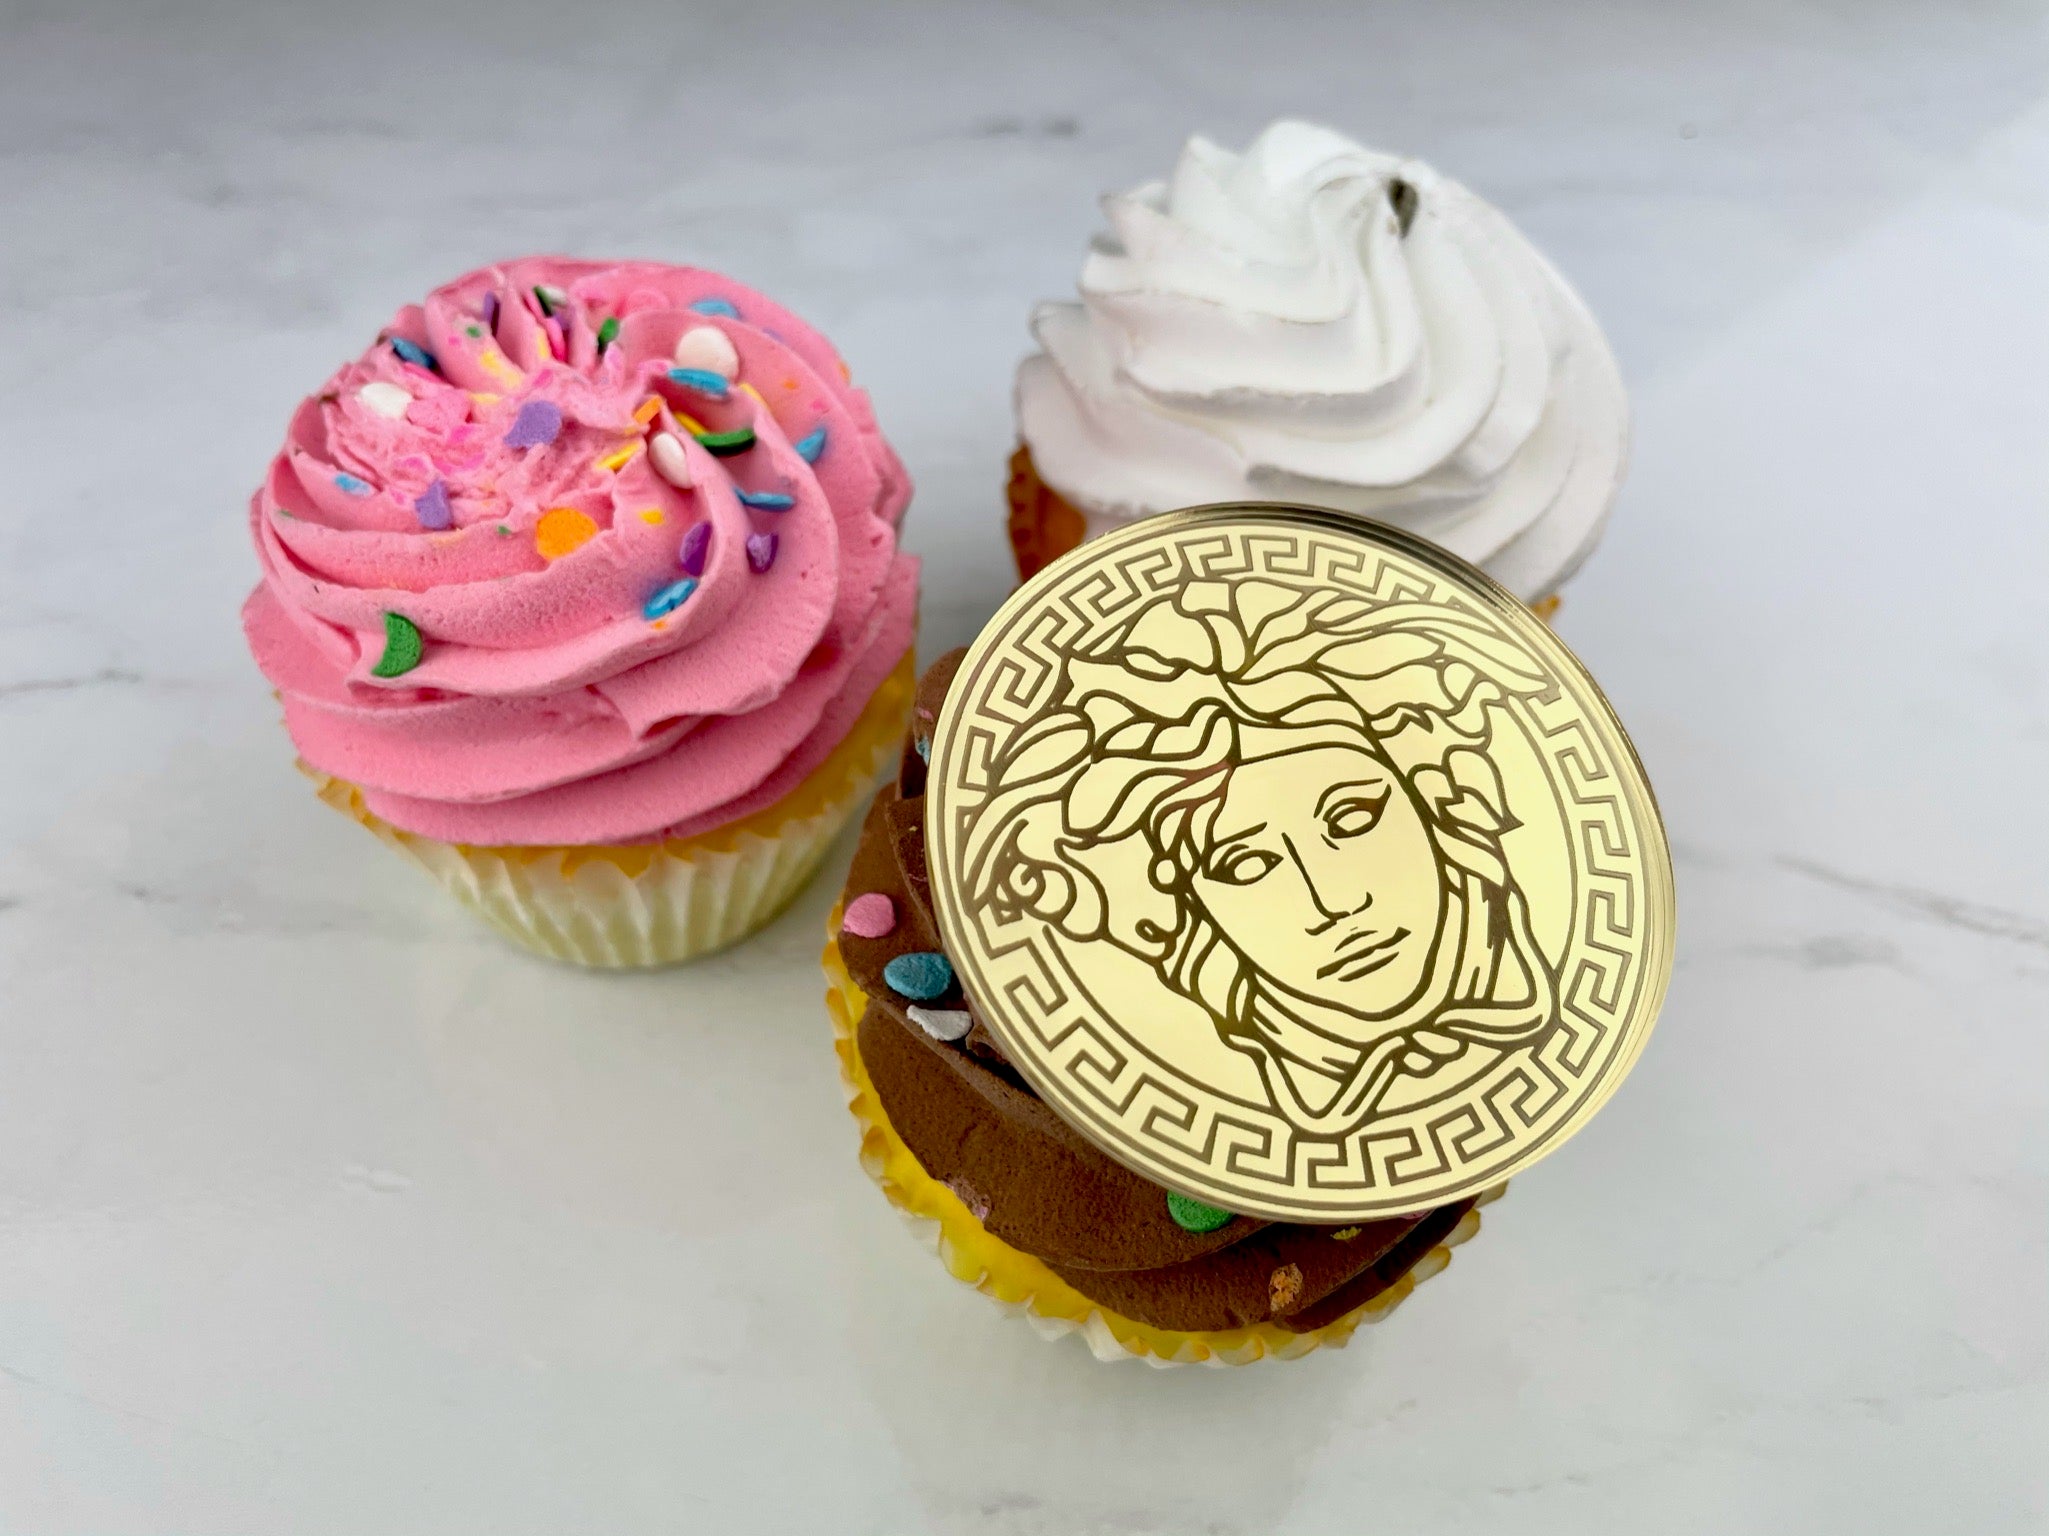 Luxury Designer Brand Cupcake Charms and Toppers (set of 6)